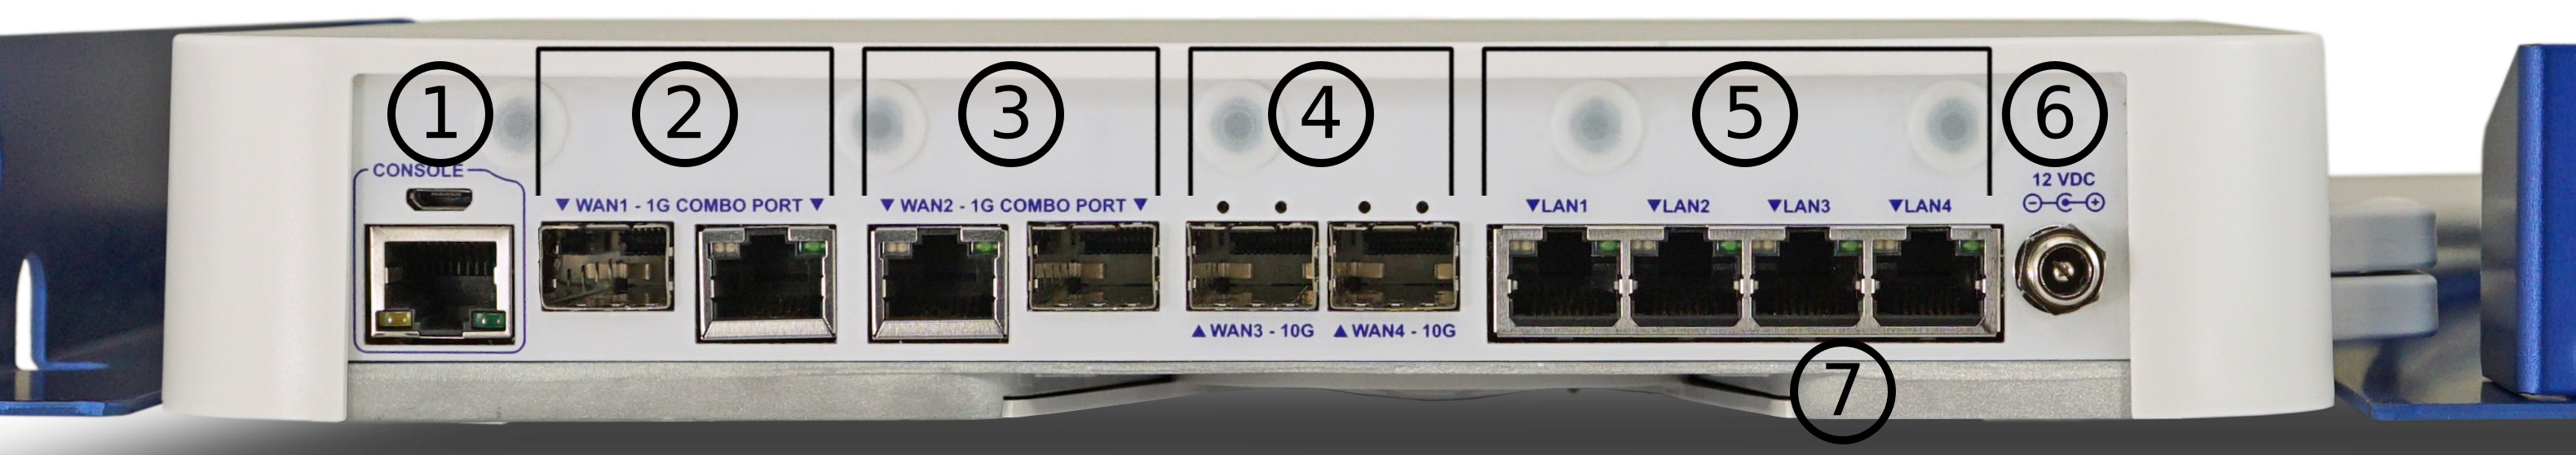 Front view of the Netgate 8200 Security Gateway ports